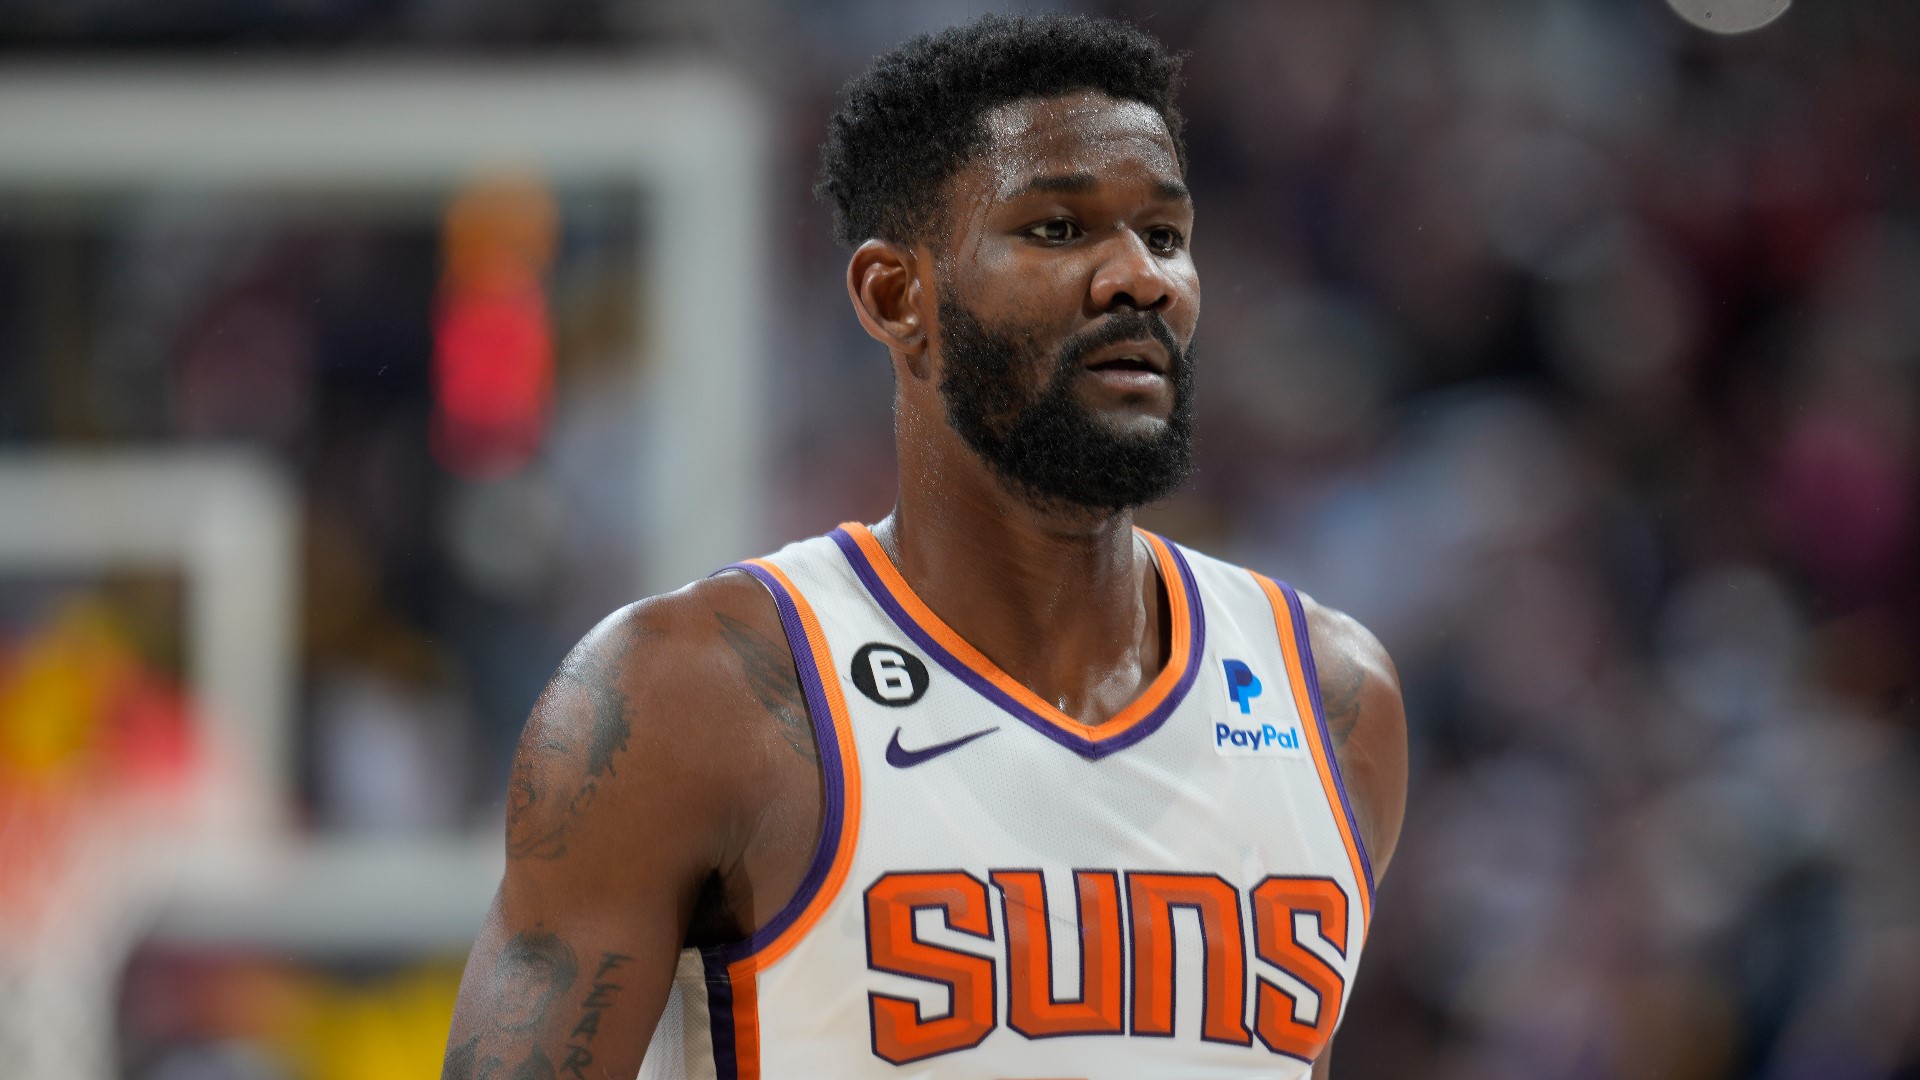 The former NBA player and current Phoenix Suns analyst spoke with 12Sport's Cam Cox about the Deandre Ayton trade.